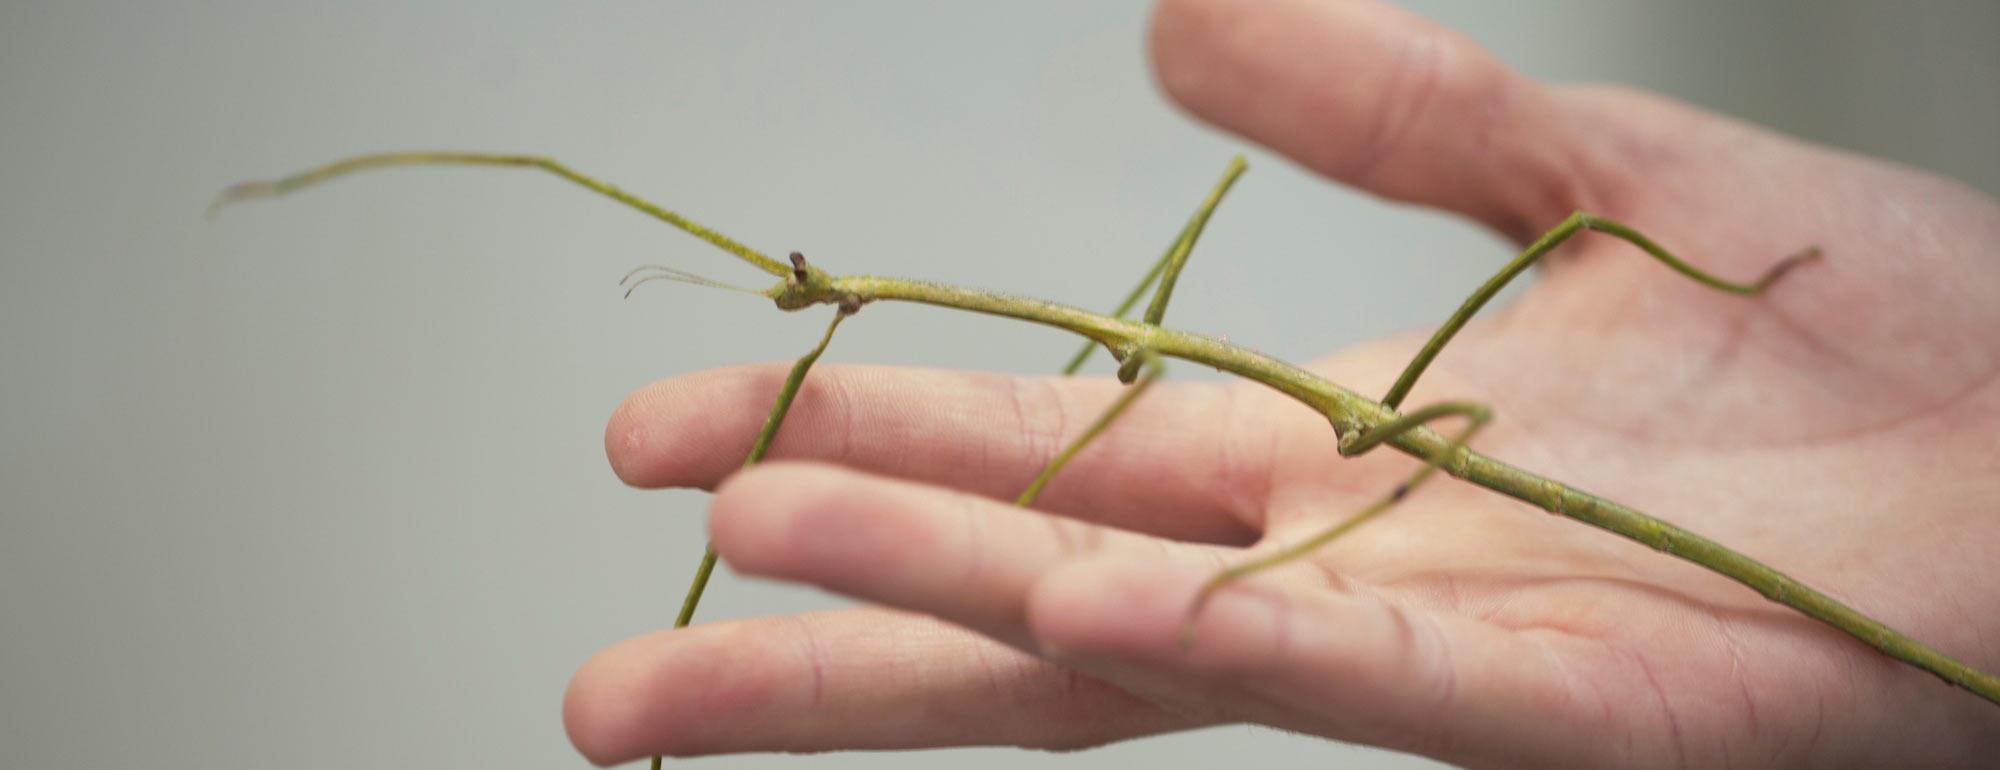 A walking stick insect crawls across a human hand